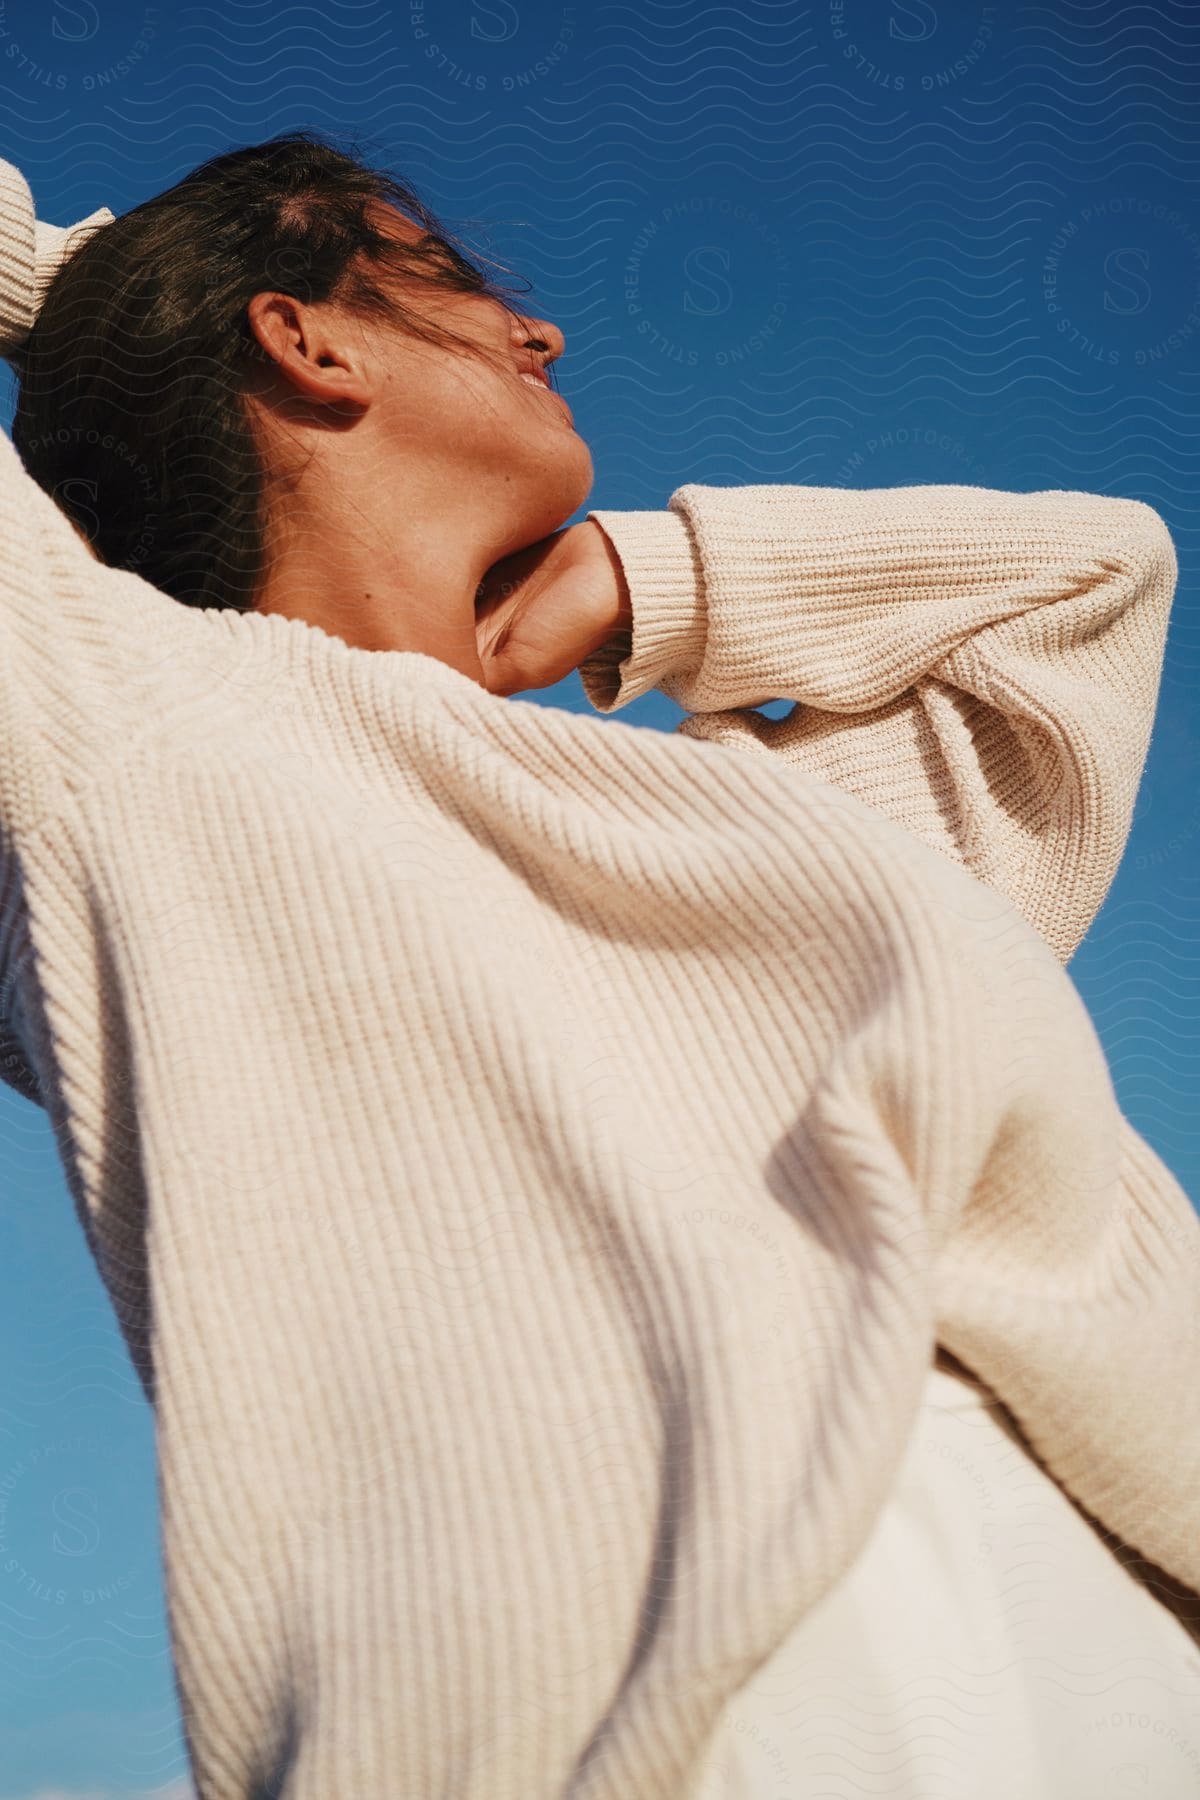 A woman models a cable knit sweater